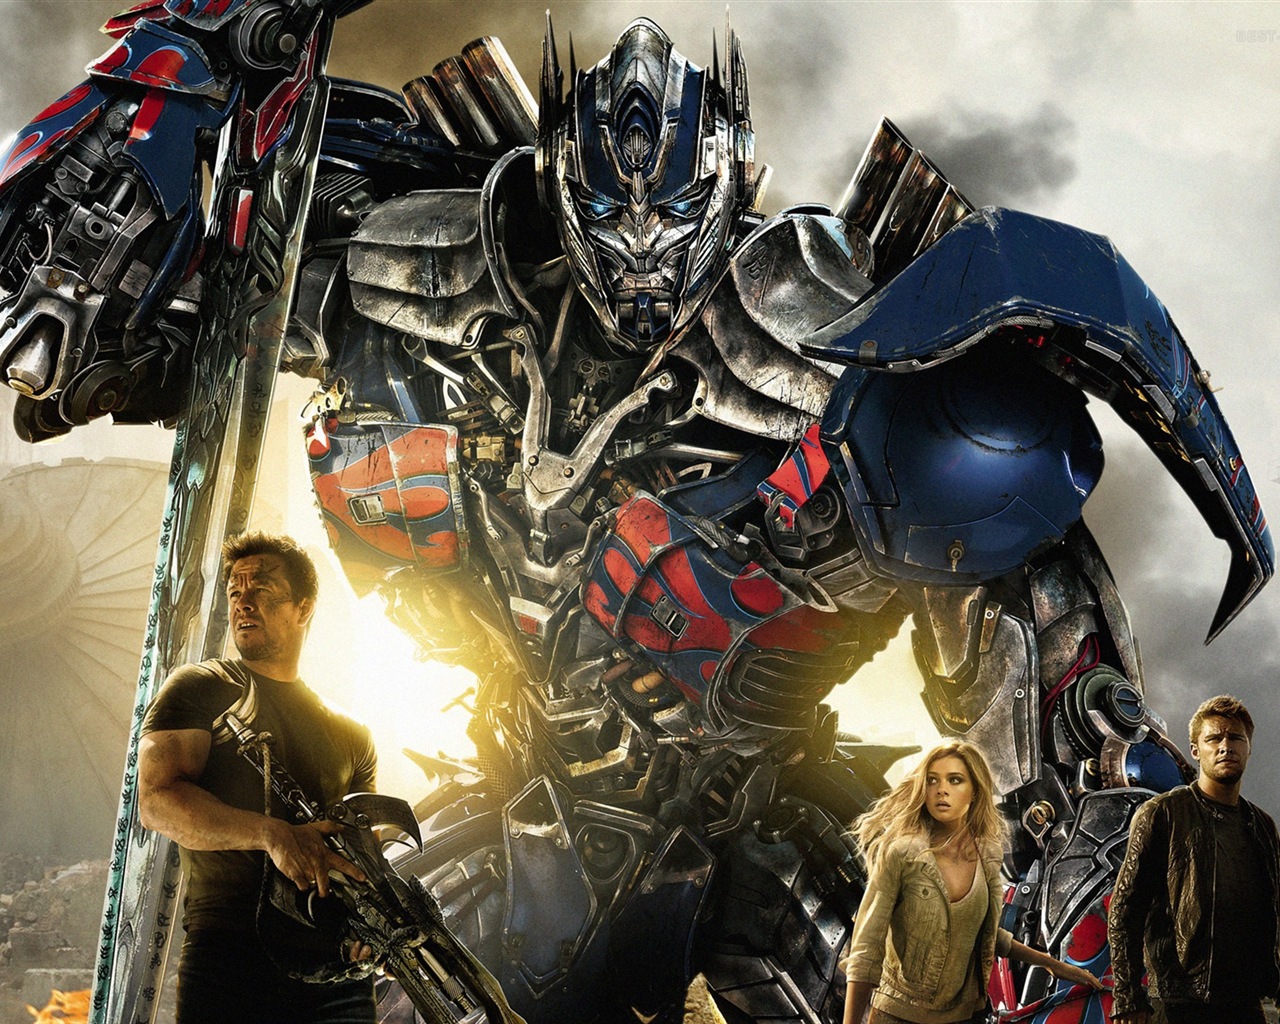 2014 Transformers: Age of Extinction HD tapety #1 - 1280x1024